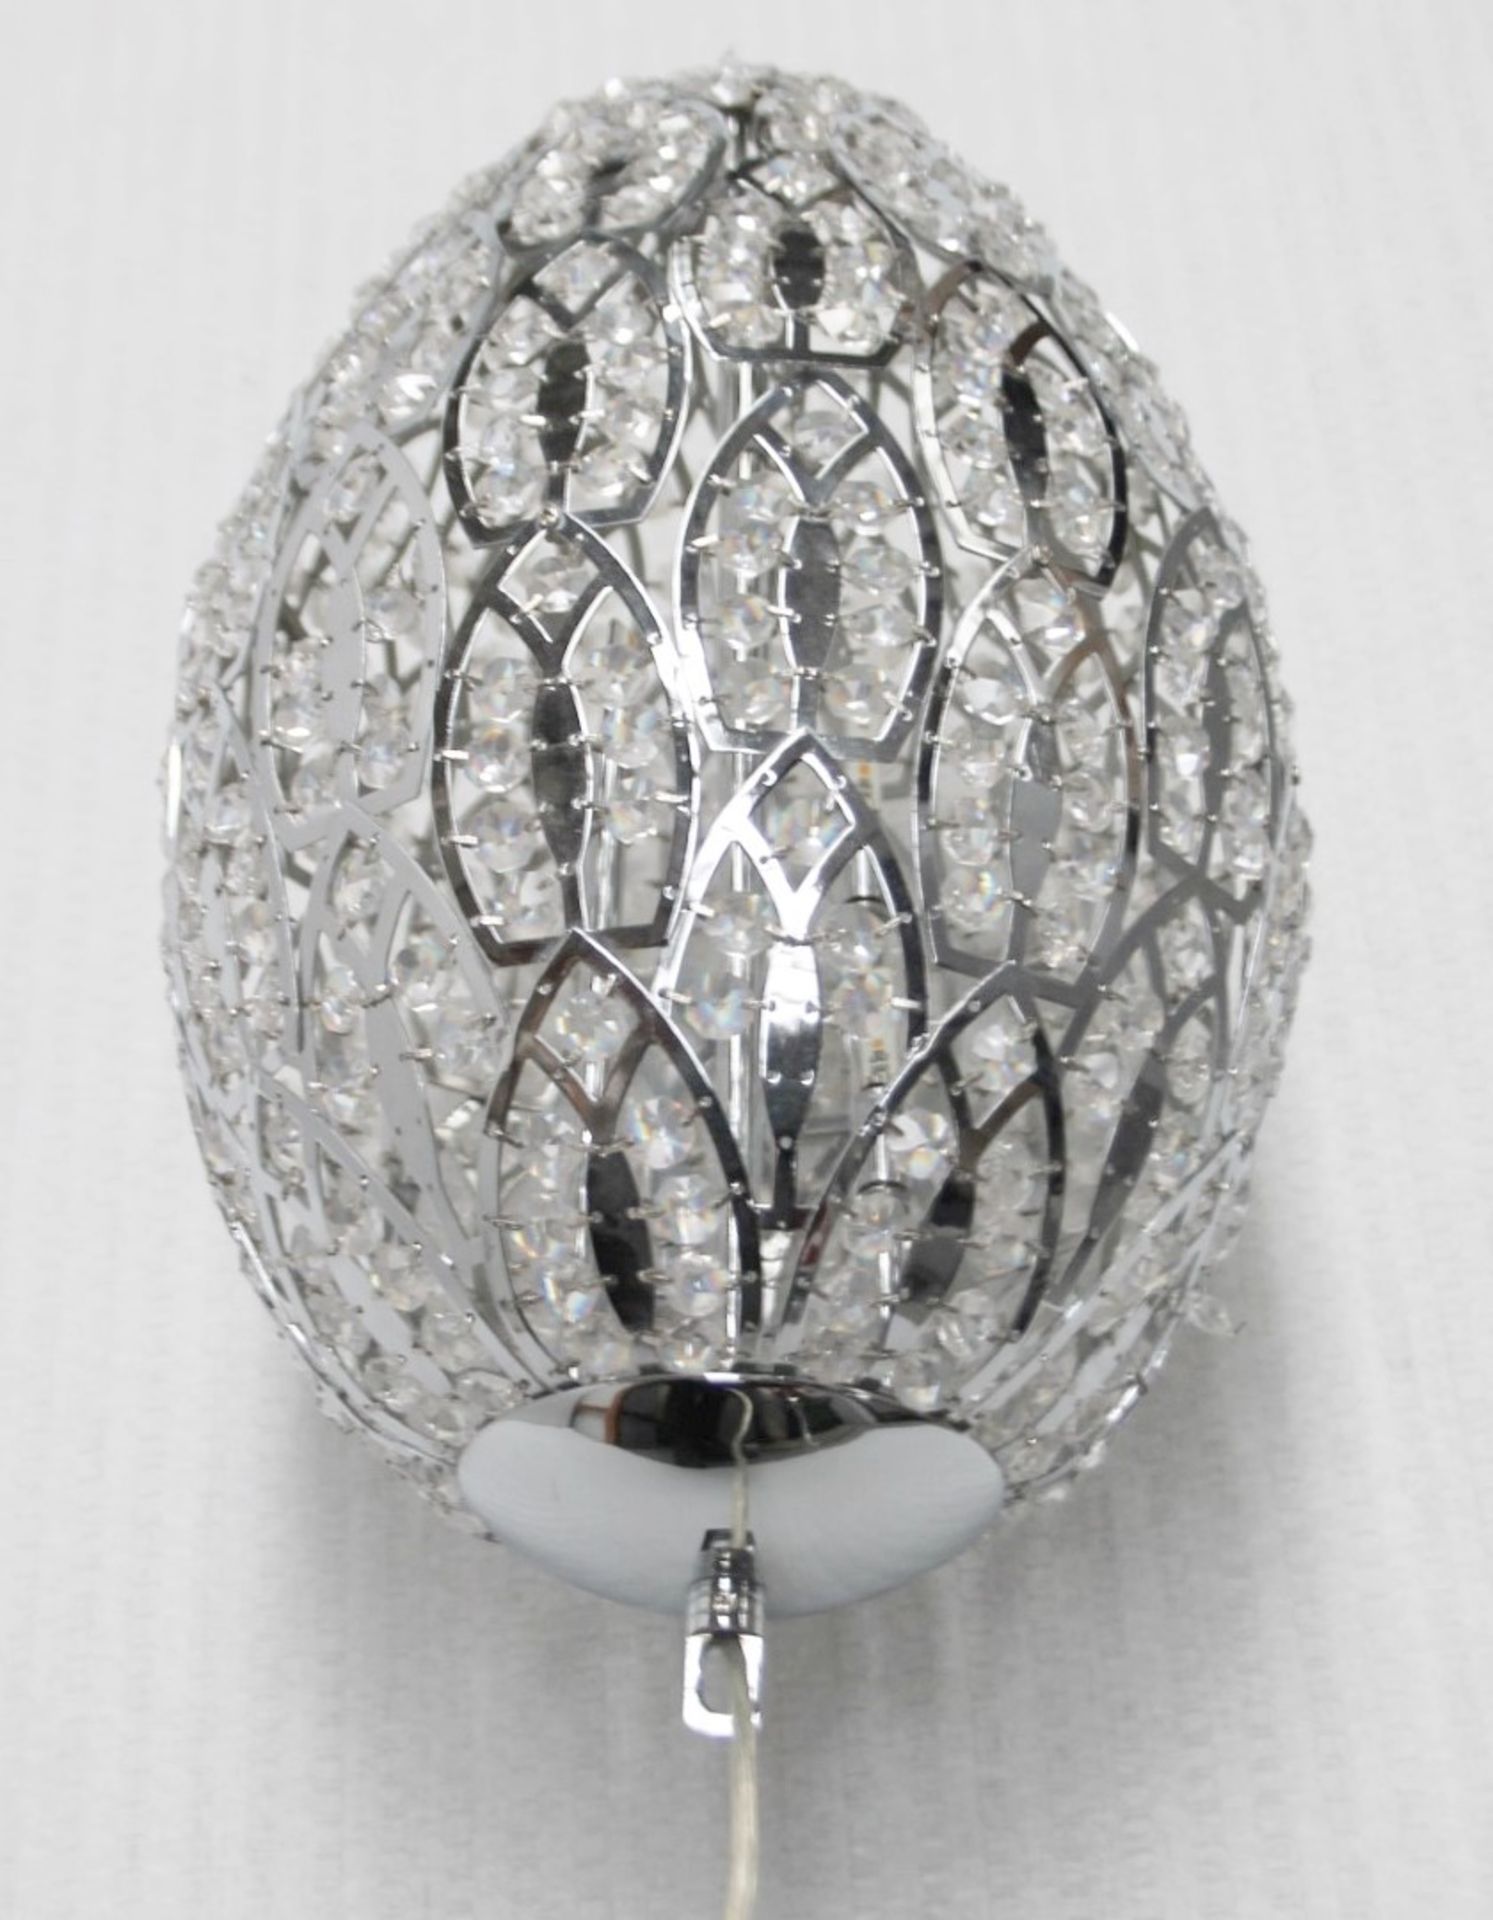 1 x High-end Italian LED Egg-Shaped Light Fitting Encrusted In Premium ASFOUR Crystal - RRP £4,000 - Image 2 of 9